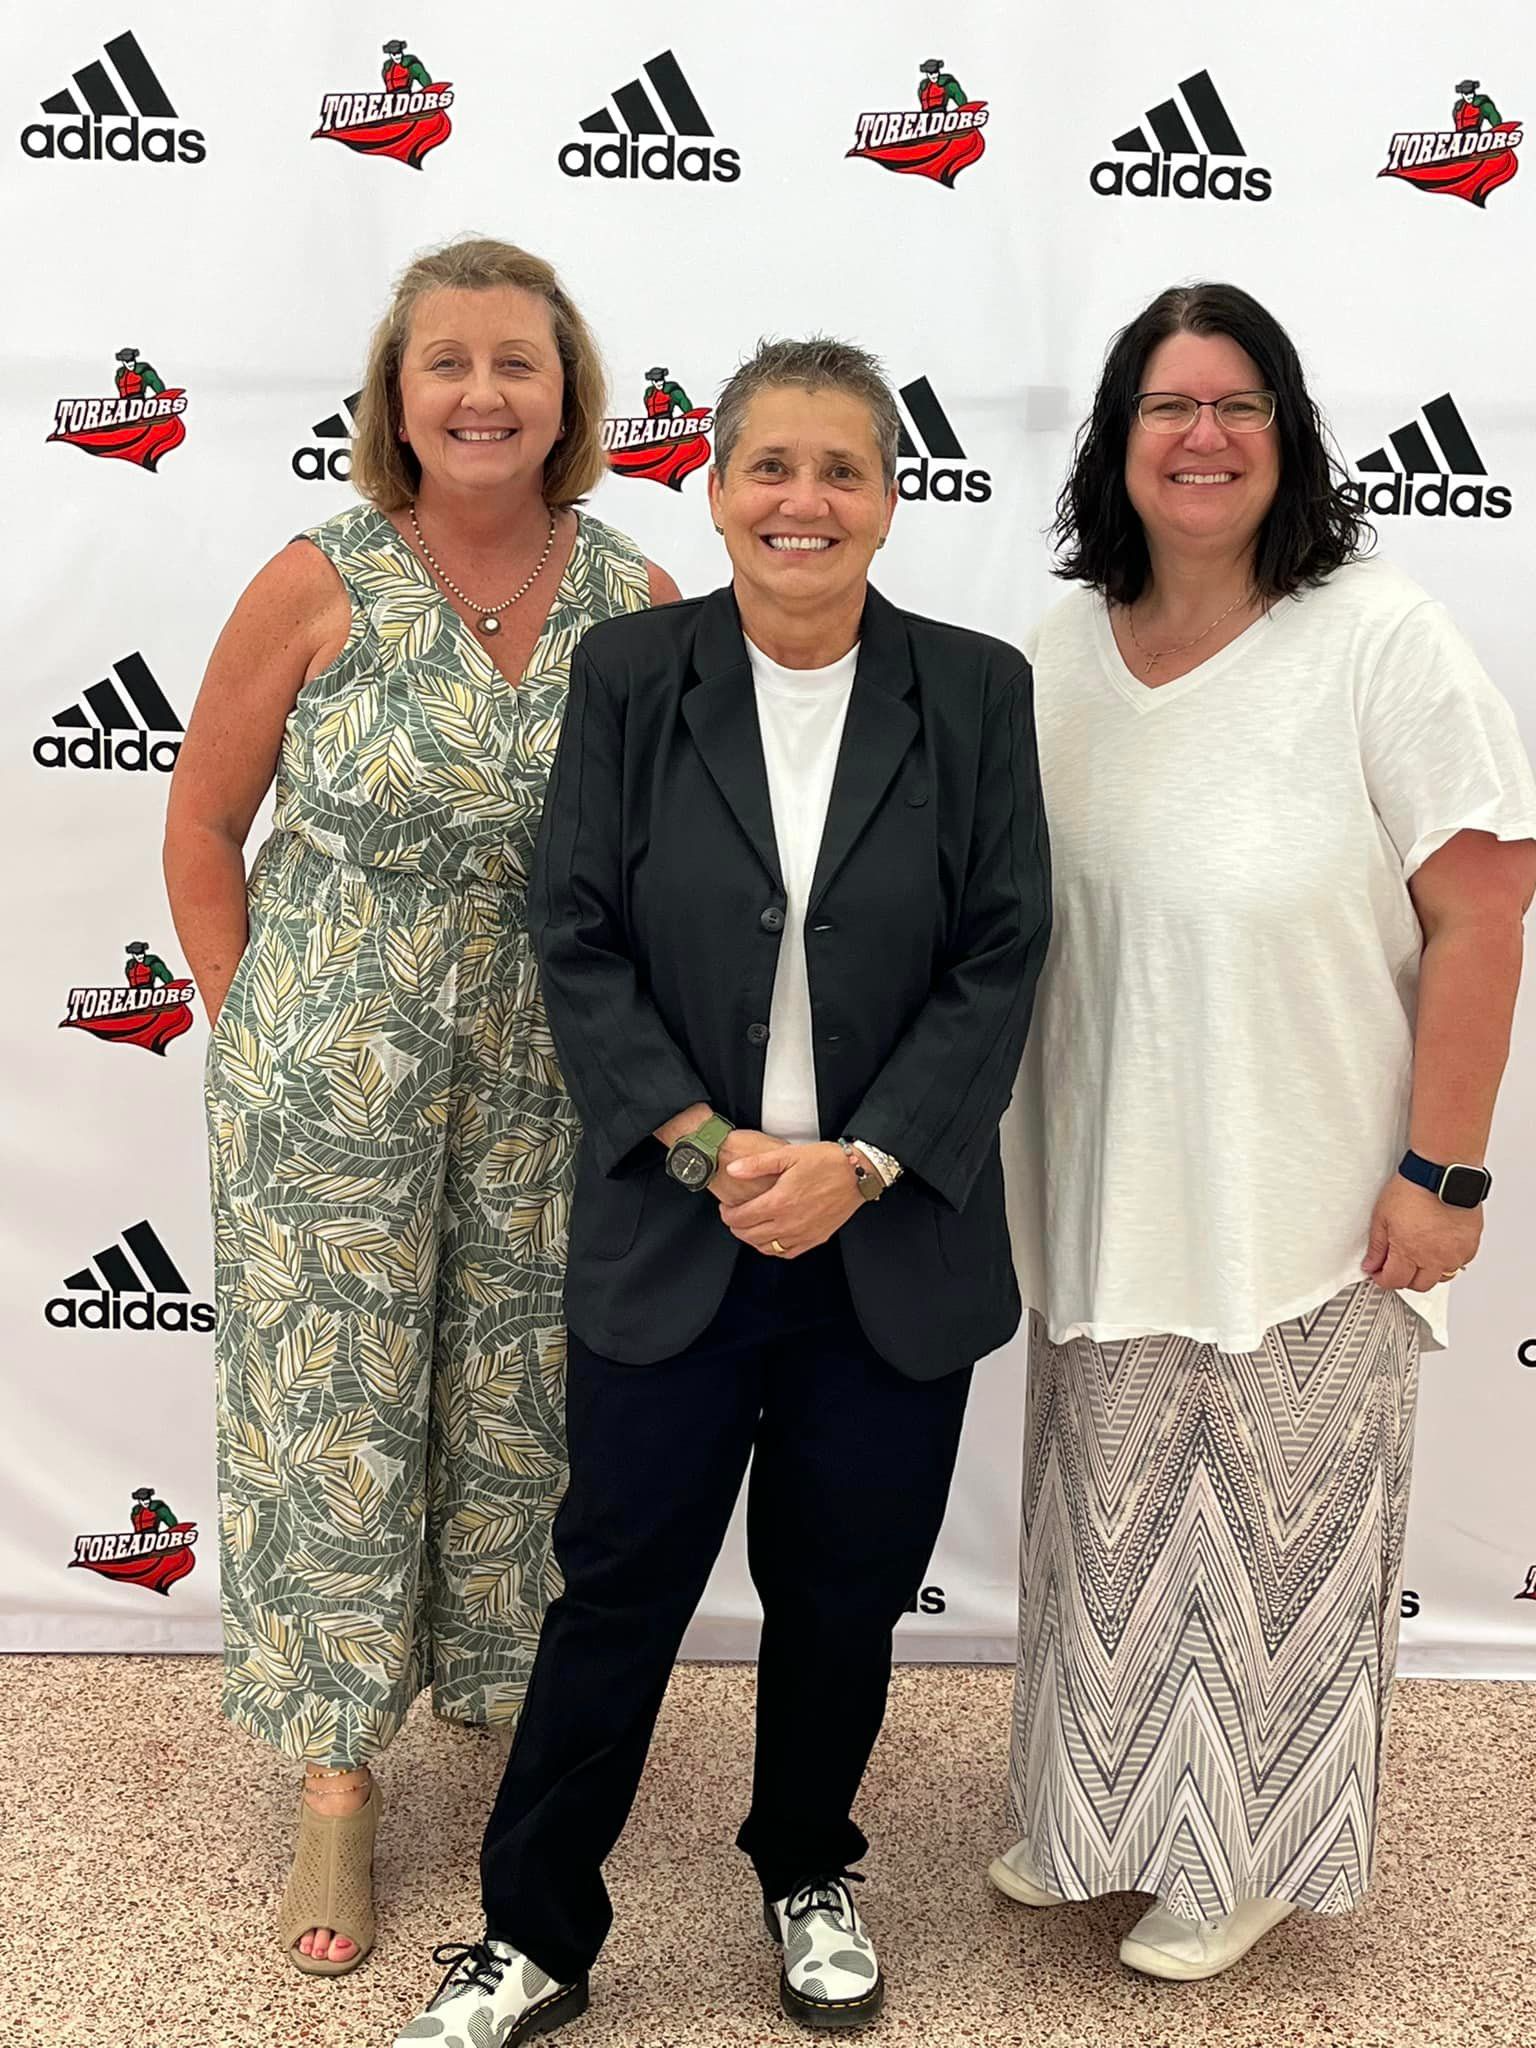 3 staff members standing in front of the Toreador and adidas logo banner 